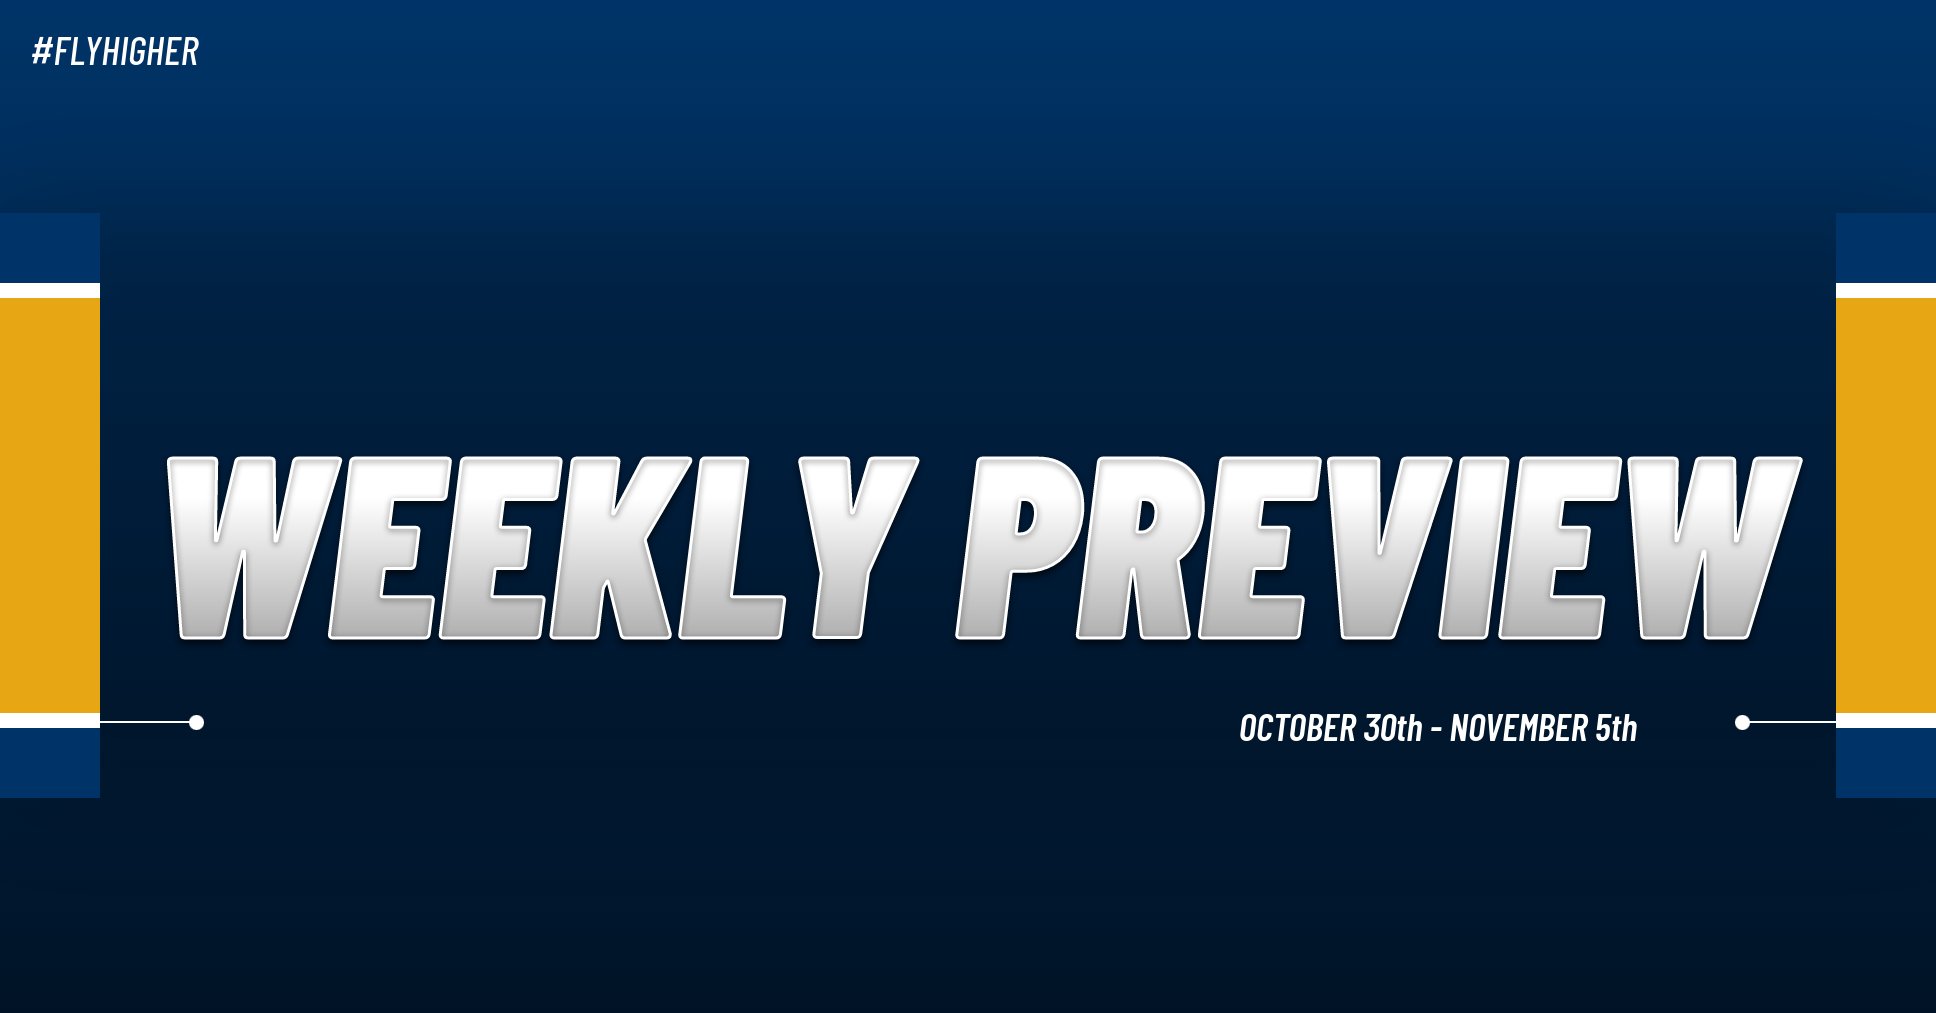 Emory Athletics Weekly Preview: Week of October 30th - November 5th